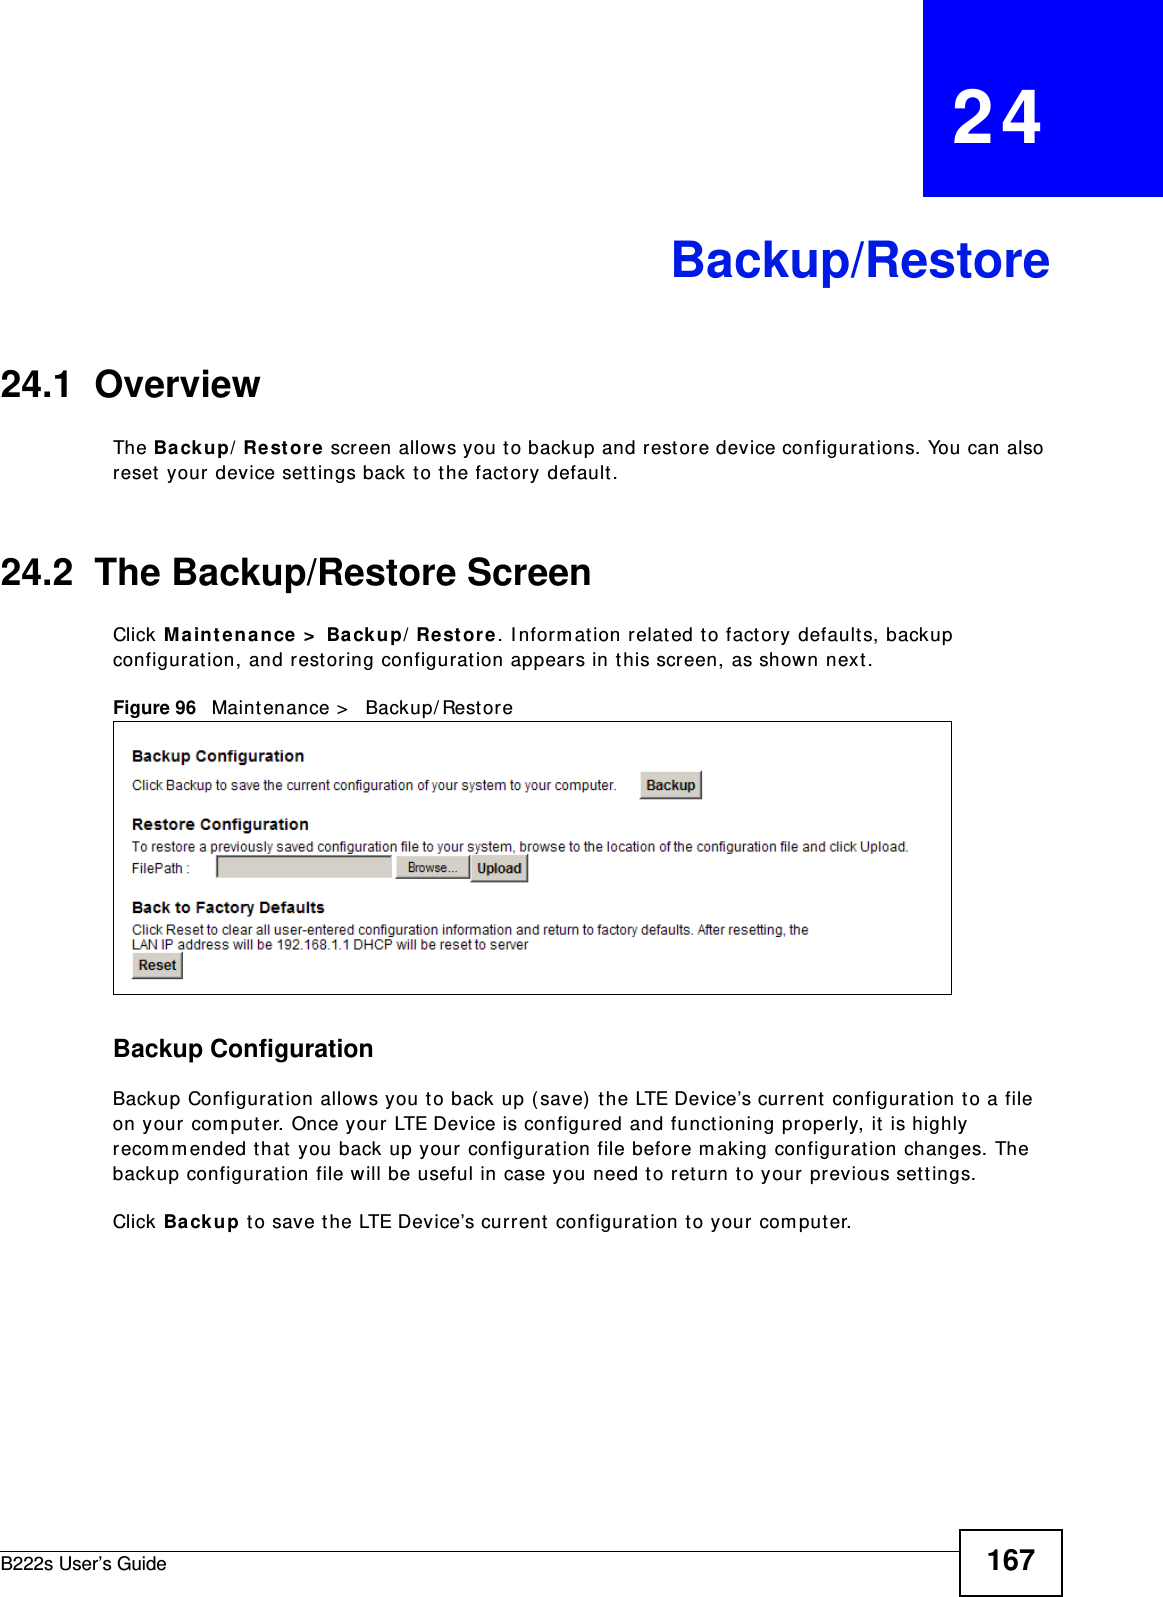 B222s User’s Guide 167CHAPTER   24Backup/Restore24.1  OverviewThe Ba ck up/ Re st or e  screen allows you to backup and rest ore device configurations. You can also reset your device sett ings back to t he factory default .24.2  The Backup/Restore Screen Click M a in t e na nce  &gt;  Ba ck u p/ Rest or e. I nform ation relat ed to factory defaults, backup configurat ion, and restoring configuration appear s in this screen, as shown next .Figure 96   Maint enance &gt;   Backup/ Rest oreBackup Configuration Backup Configurat ion allows you t o back up ( save)  t he LTE Device’s current configurat ion to a file on your com puter. Once your LTE Device is configured and funct ioning pr operly, it  is highly recom m ended t hat  you back up your configurat ion file before m aking configurat ion changes. The backup configurat ion file will be useful in case you need to return t o your previous sett ings. Click Ba ckup t o save the LTE Device’s current configurat ion t o your com put er.